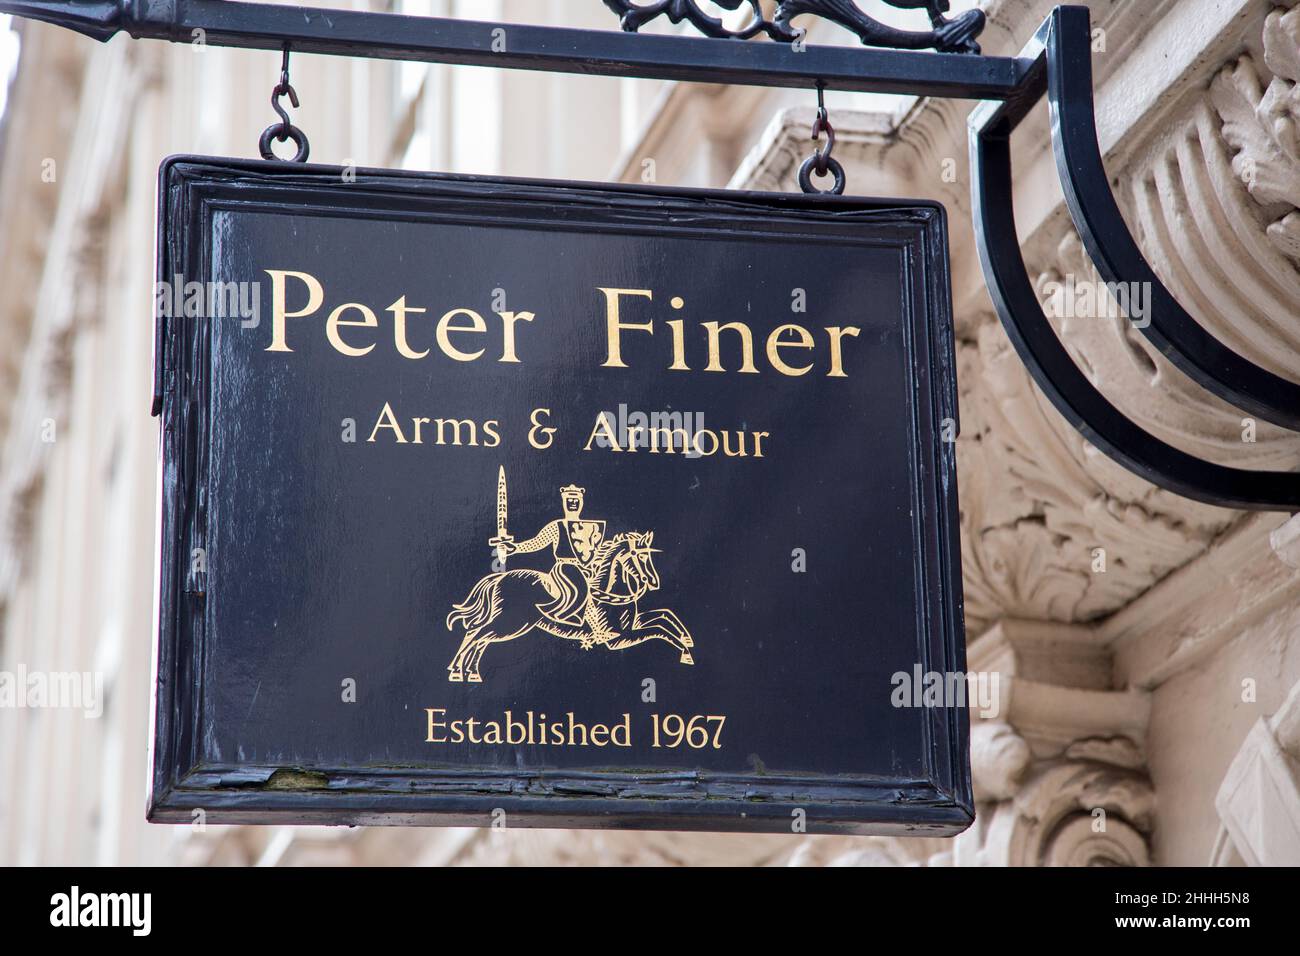 Peter Finer antique shop selling arms and armour, London Stock Photo